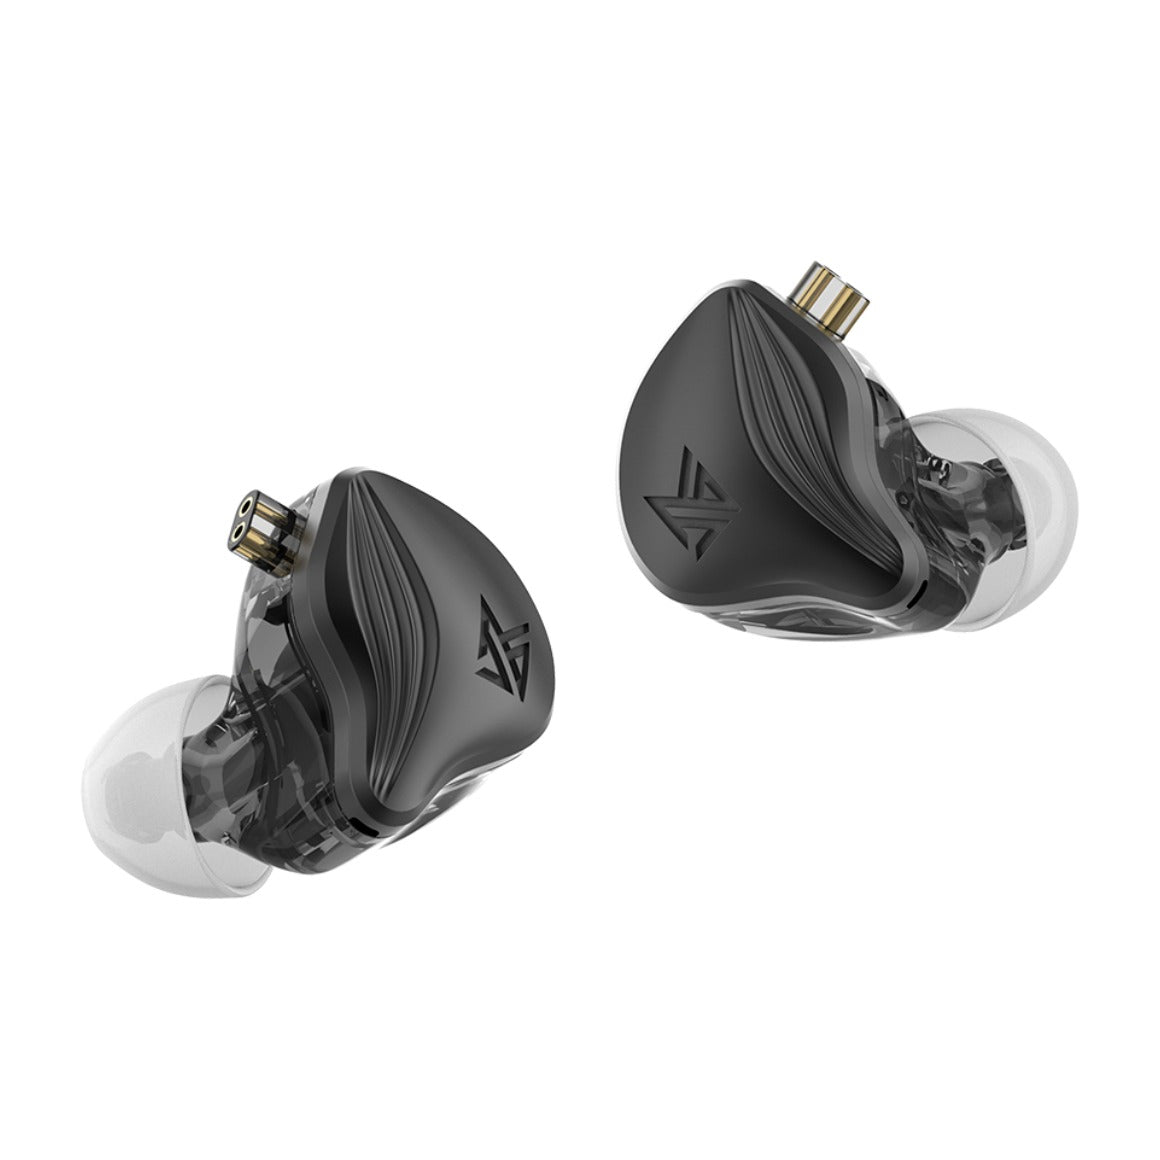 KZ ZSN PRO X In-ear Headphone 1DD+1BA Dual Dynamic Driver Earphone with  Deep Bass Stereo Sound Ergonomic Comfortable Earbuds with Detachable Cable  for 3.5mm Audio Interface Devices (No Mic) 